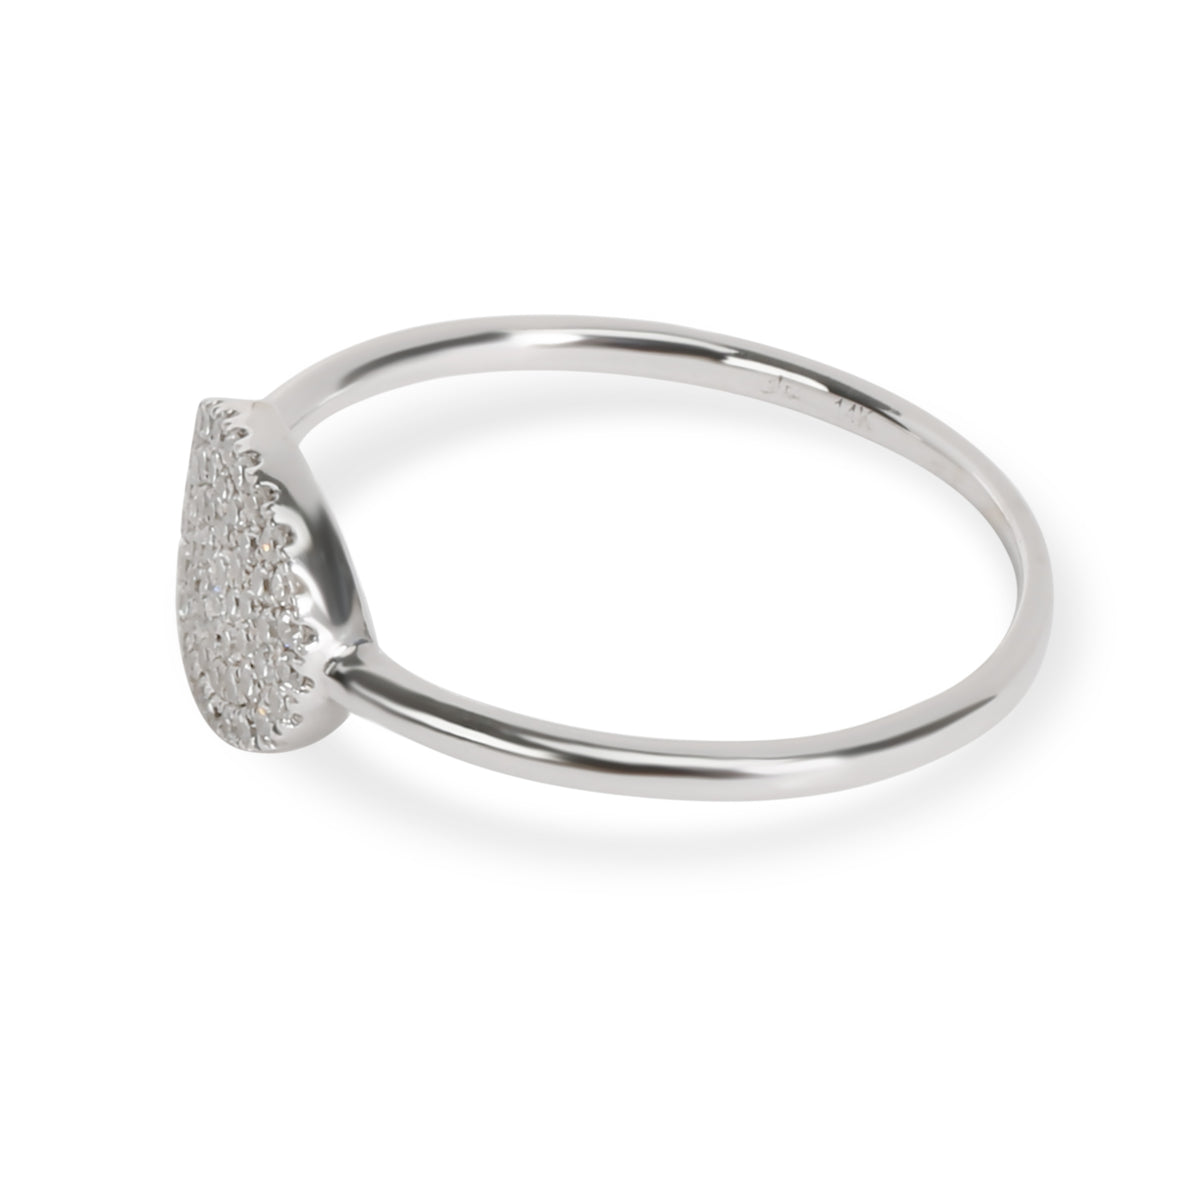 Pave Oval Shape Diamond Ring in 14K White Gold 0.22 CTW